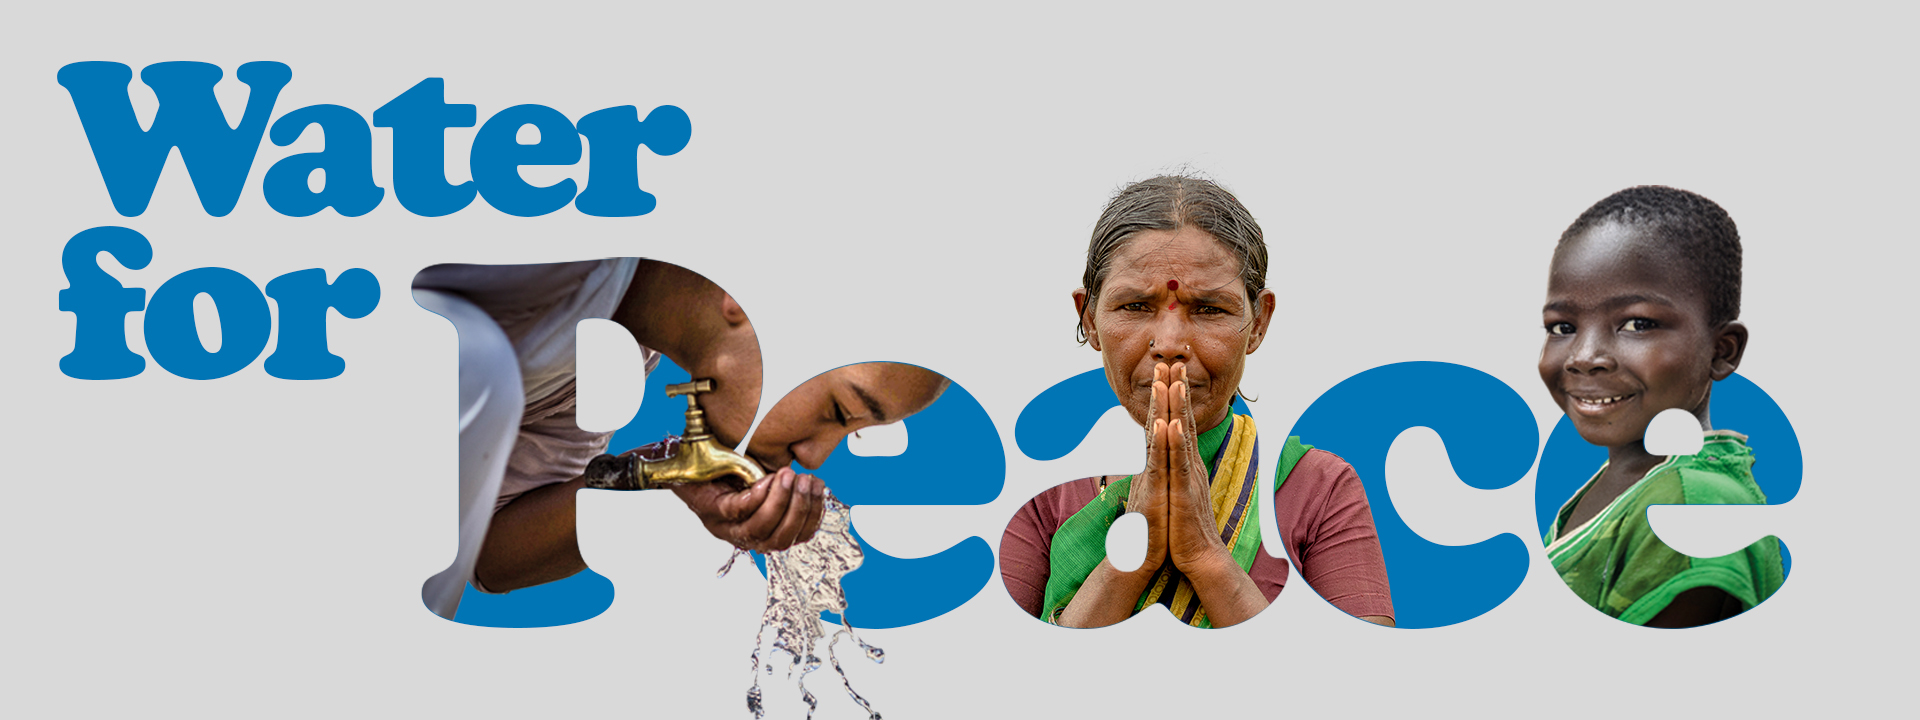 Water for Peace, Justice for Water